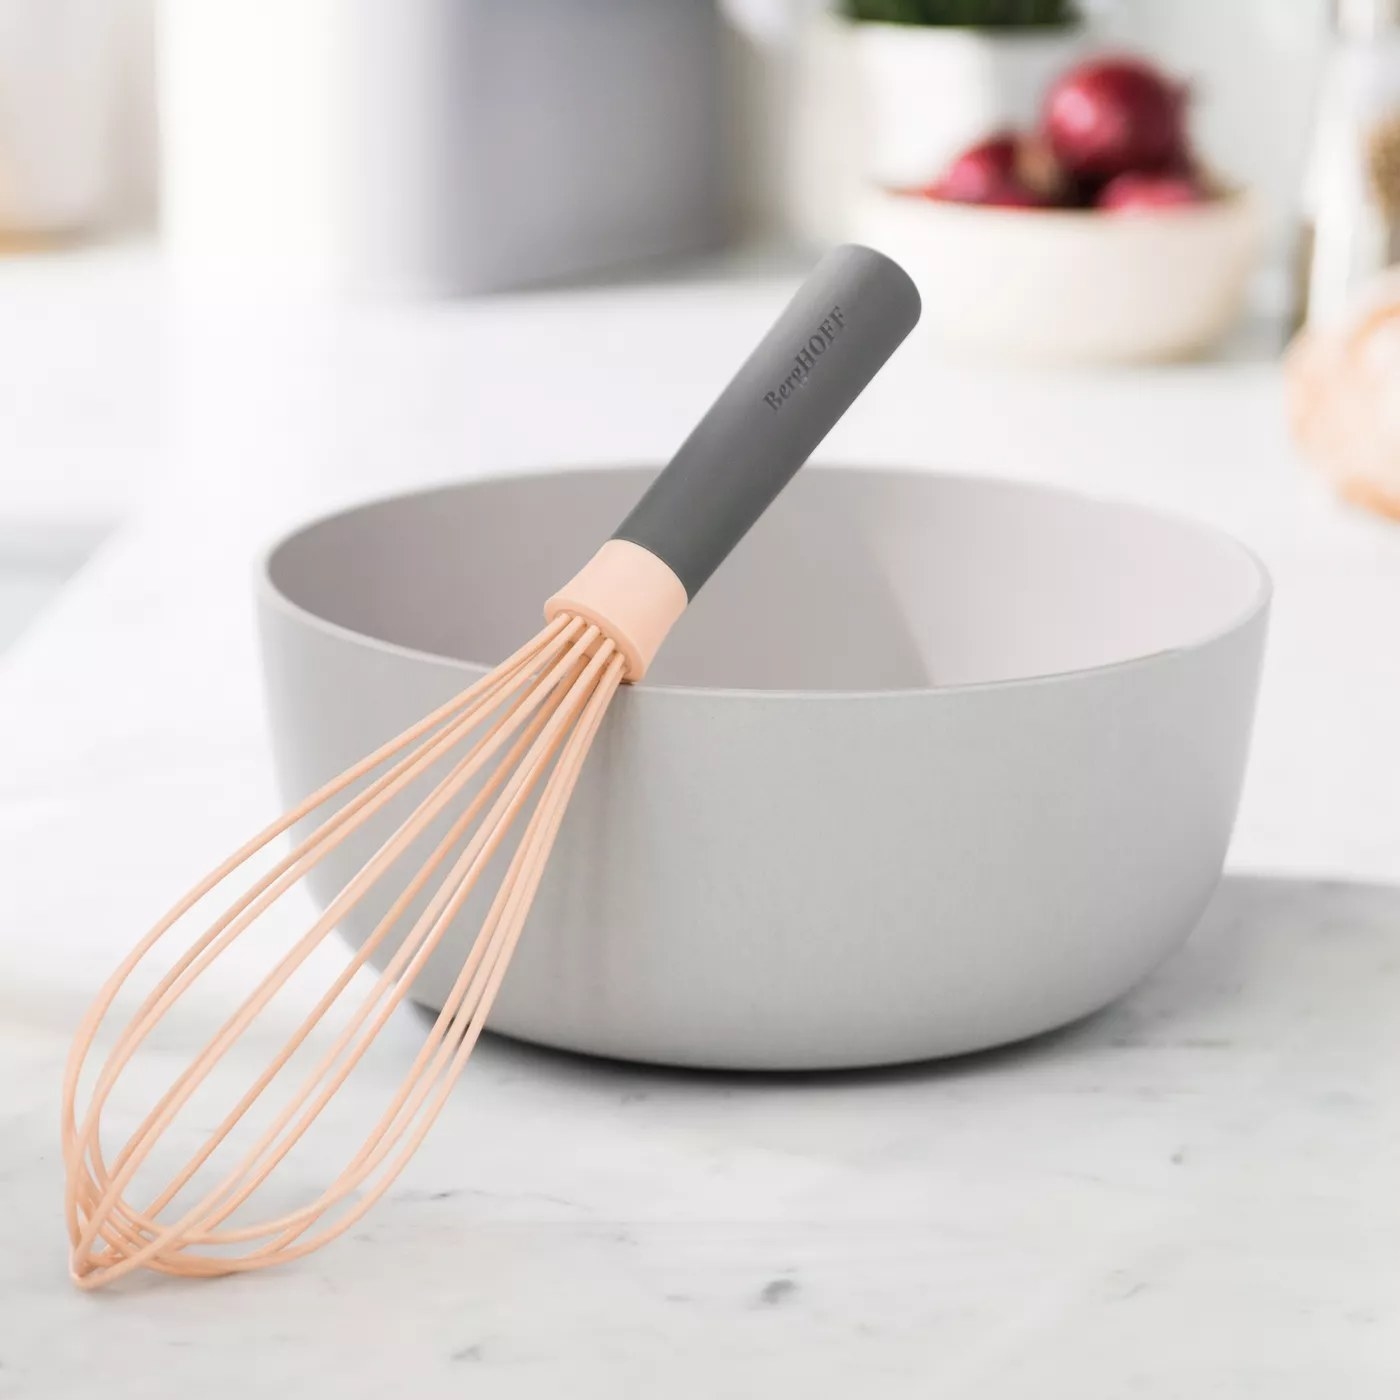 The pink and gray whisk